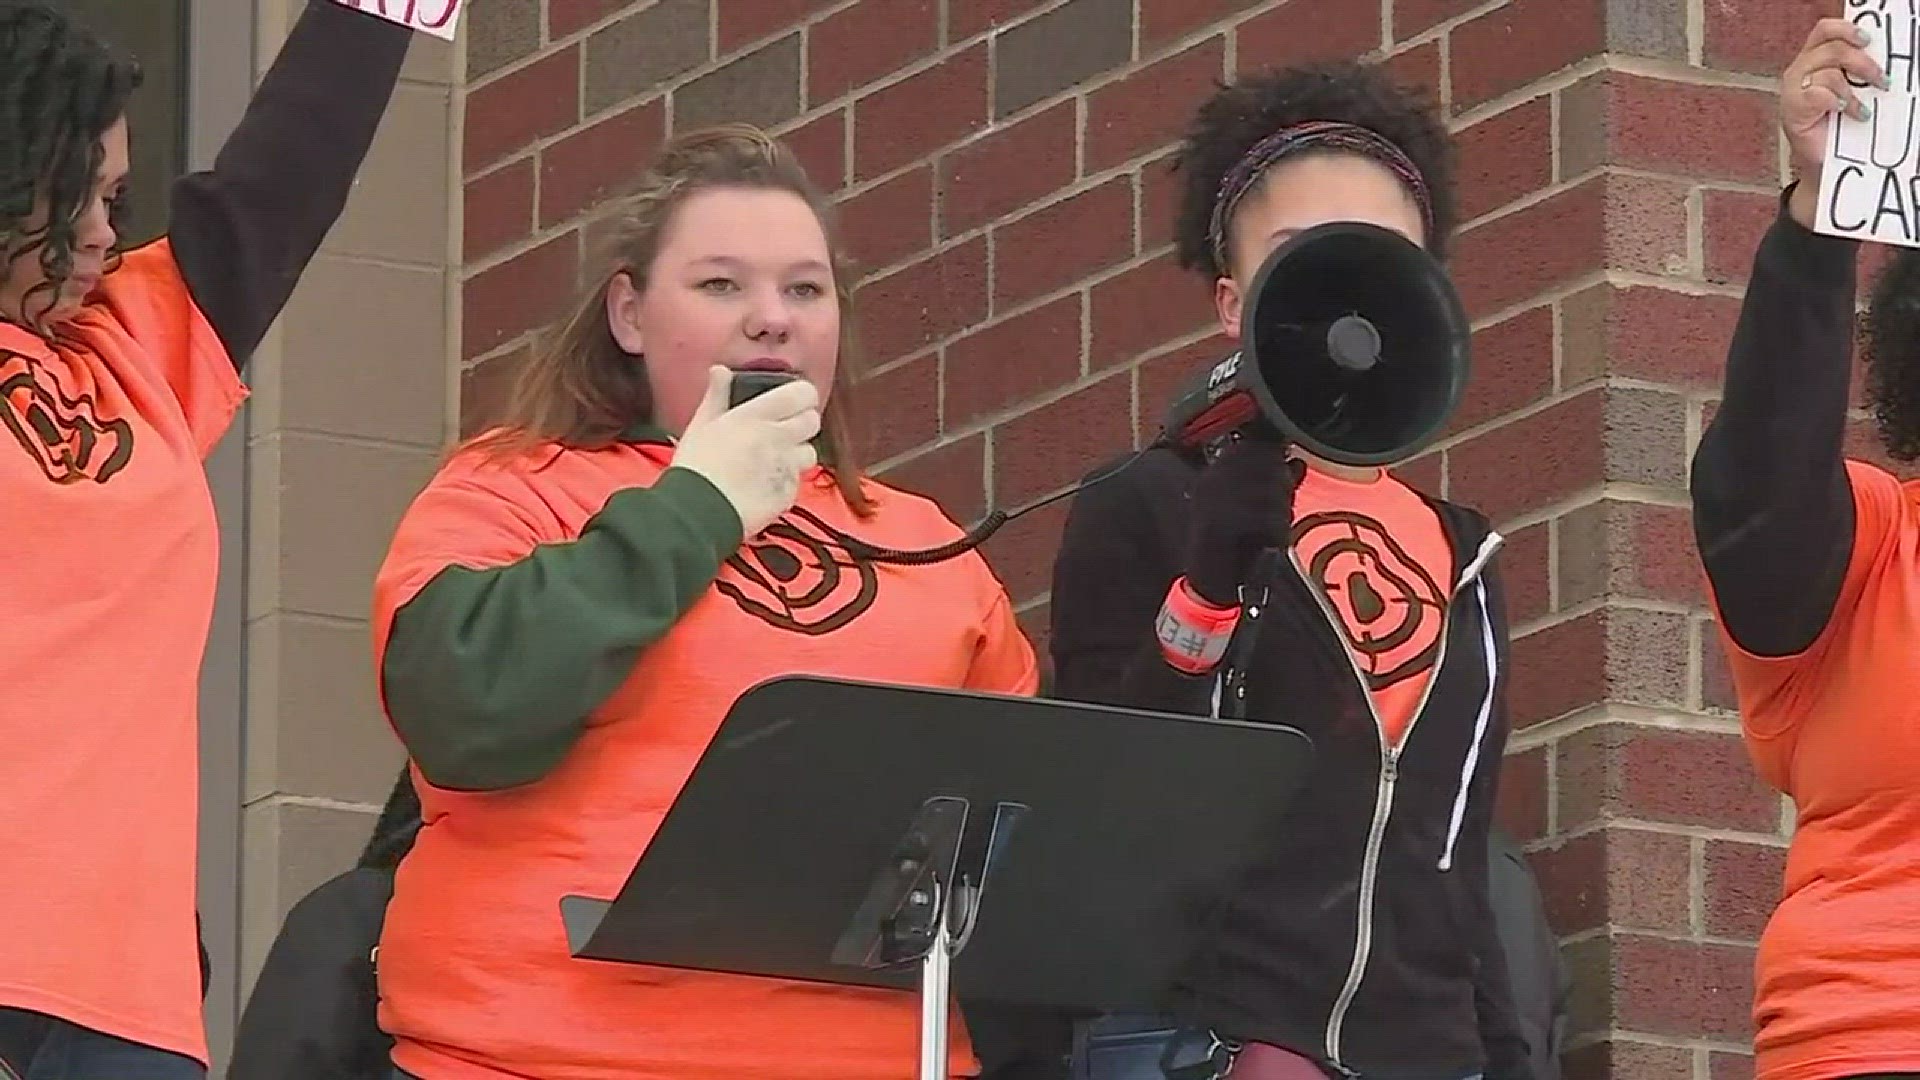 March 14, 2018: 'We are standing here because we know that we can defeat it. We are not afraid!' Those were the words of a Firestone High School student during the national walkout to protest gun violence.